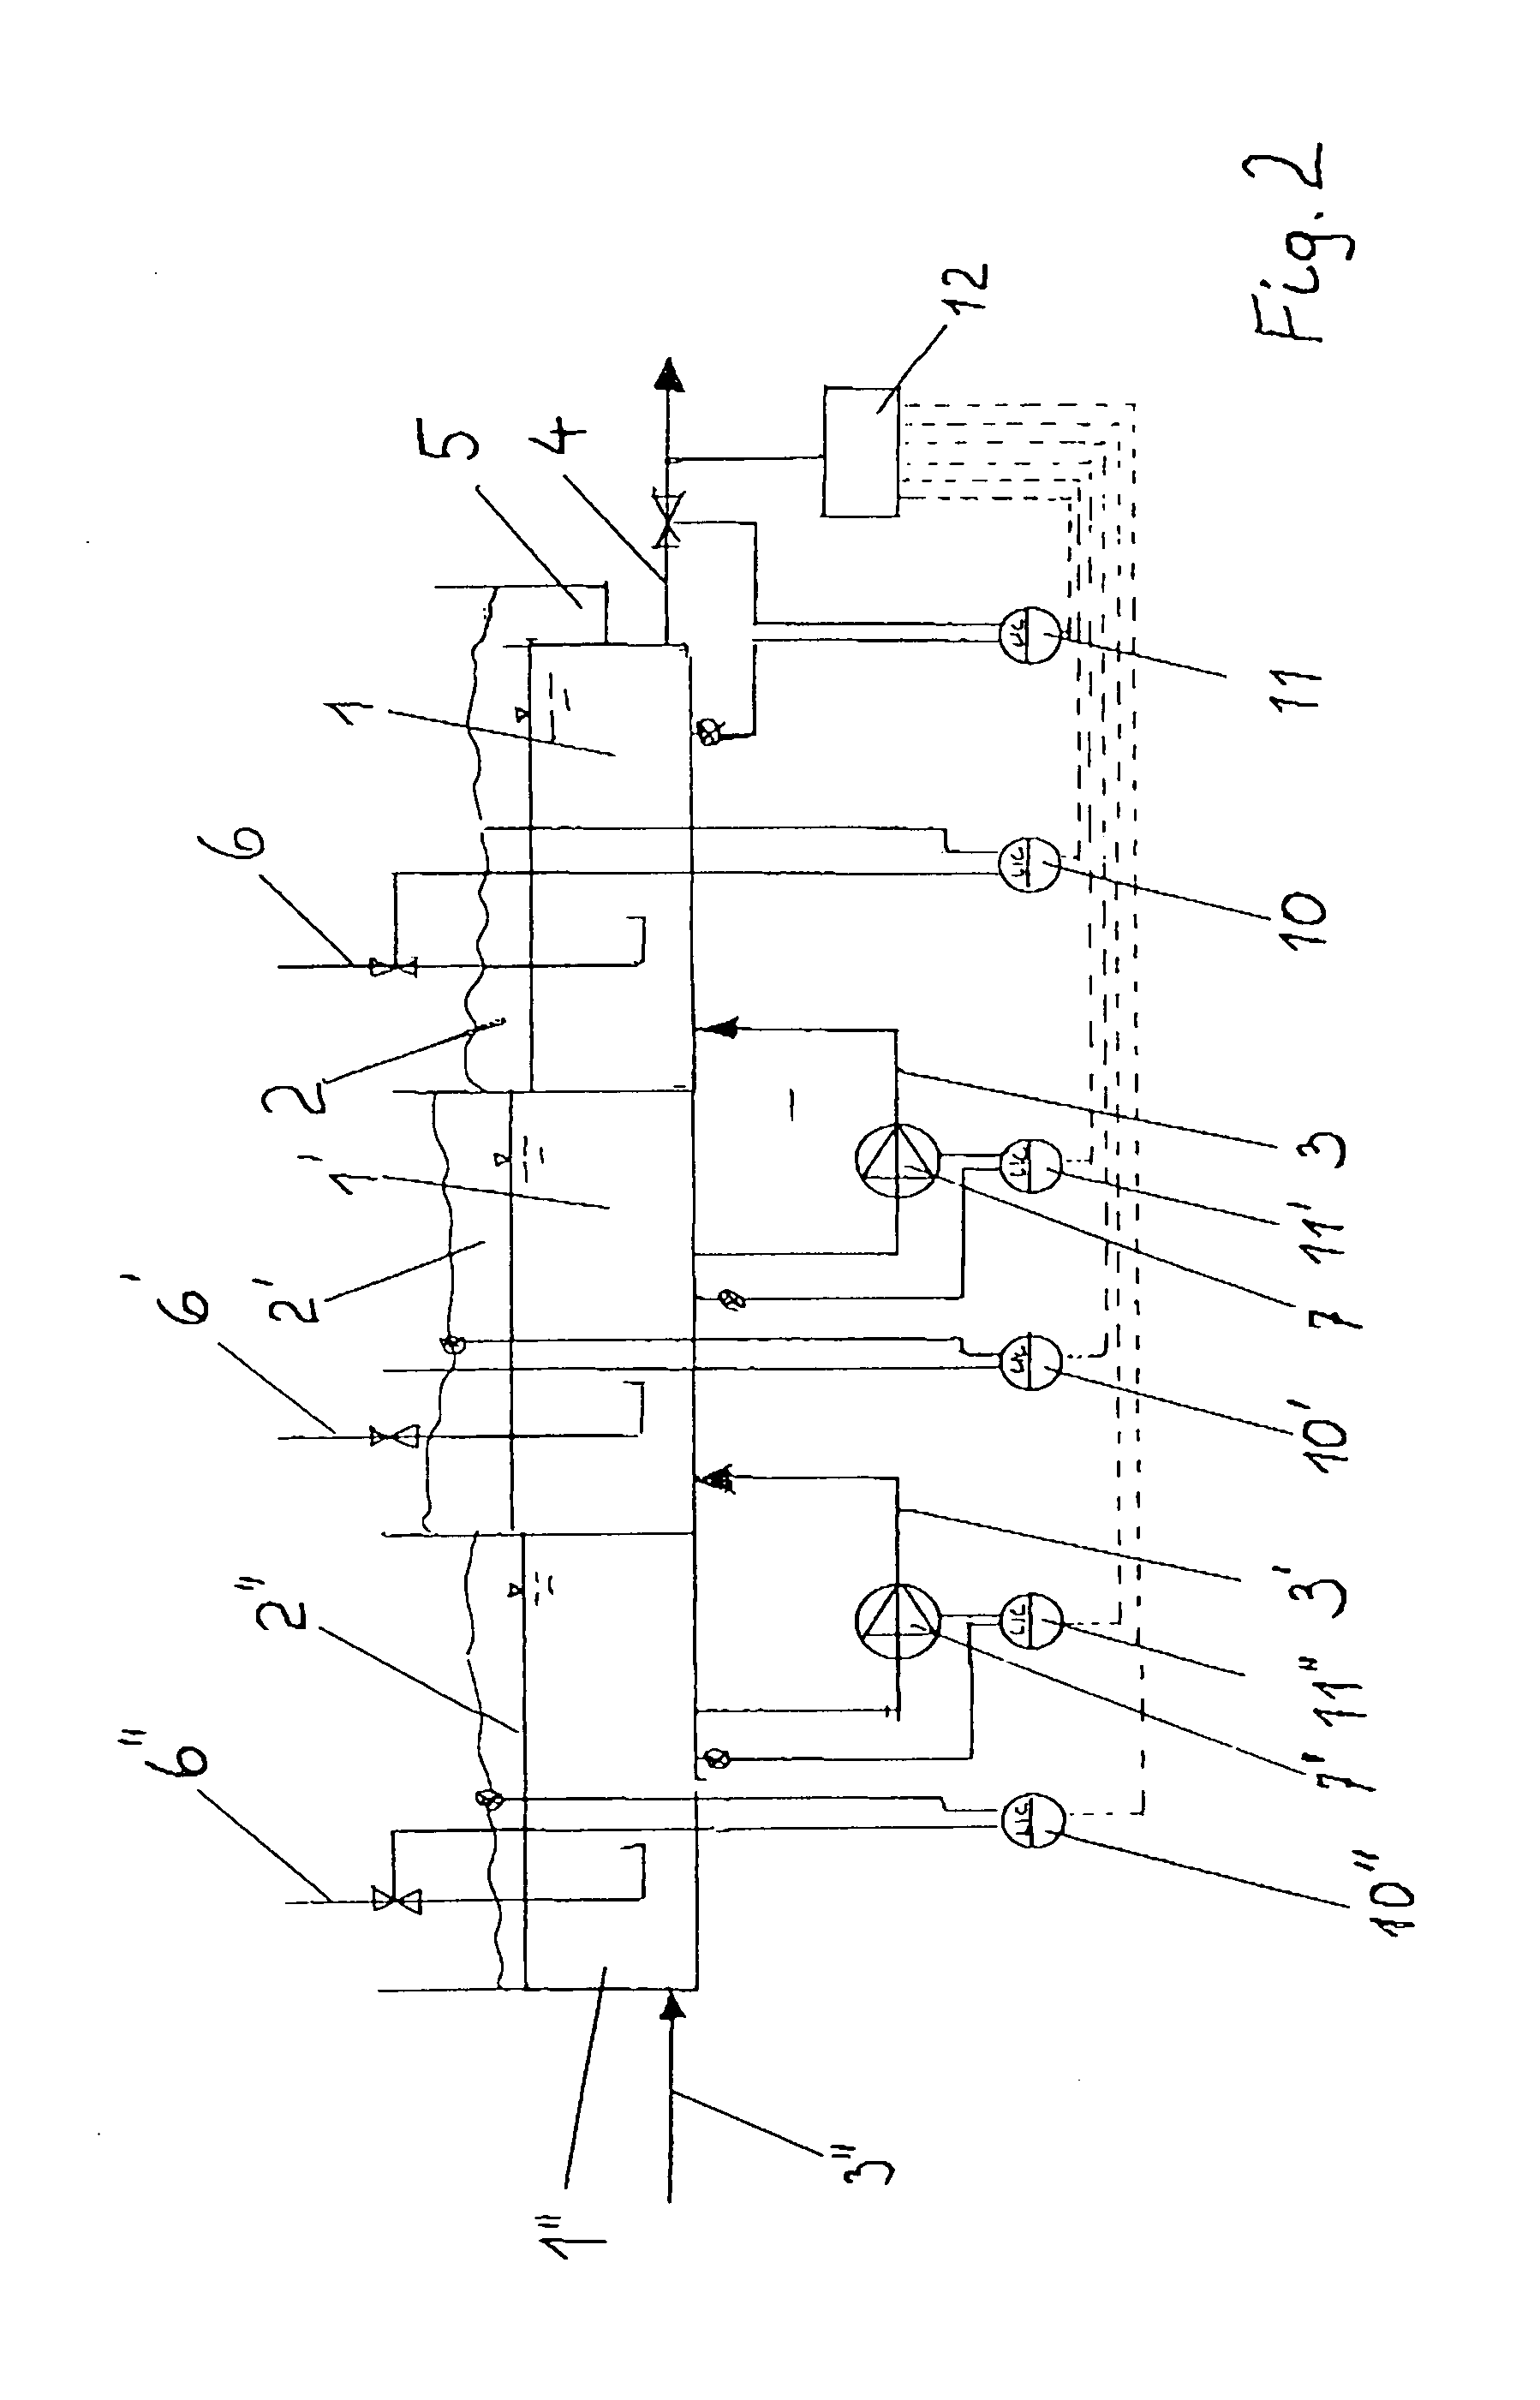 Process for controlling operation of a flotation cell